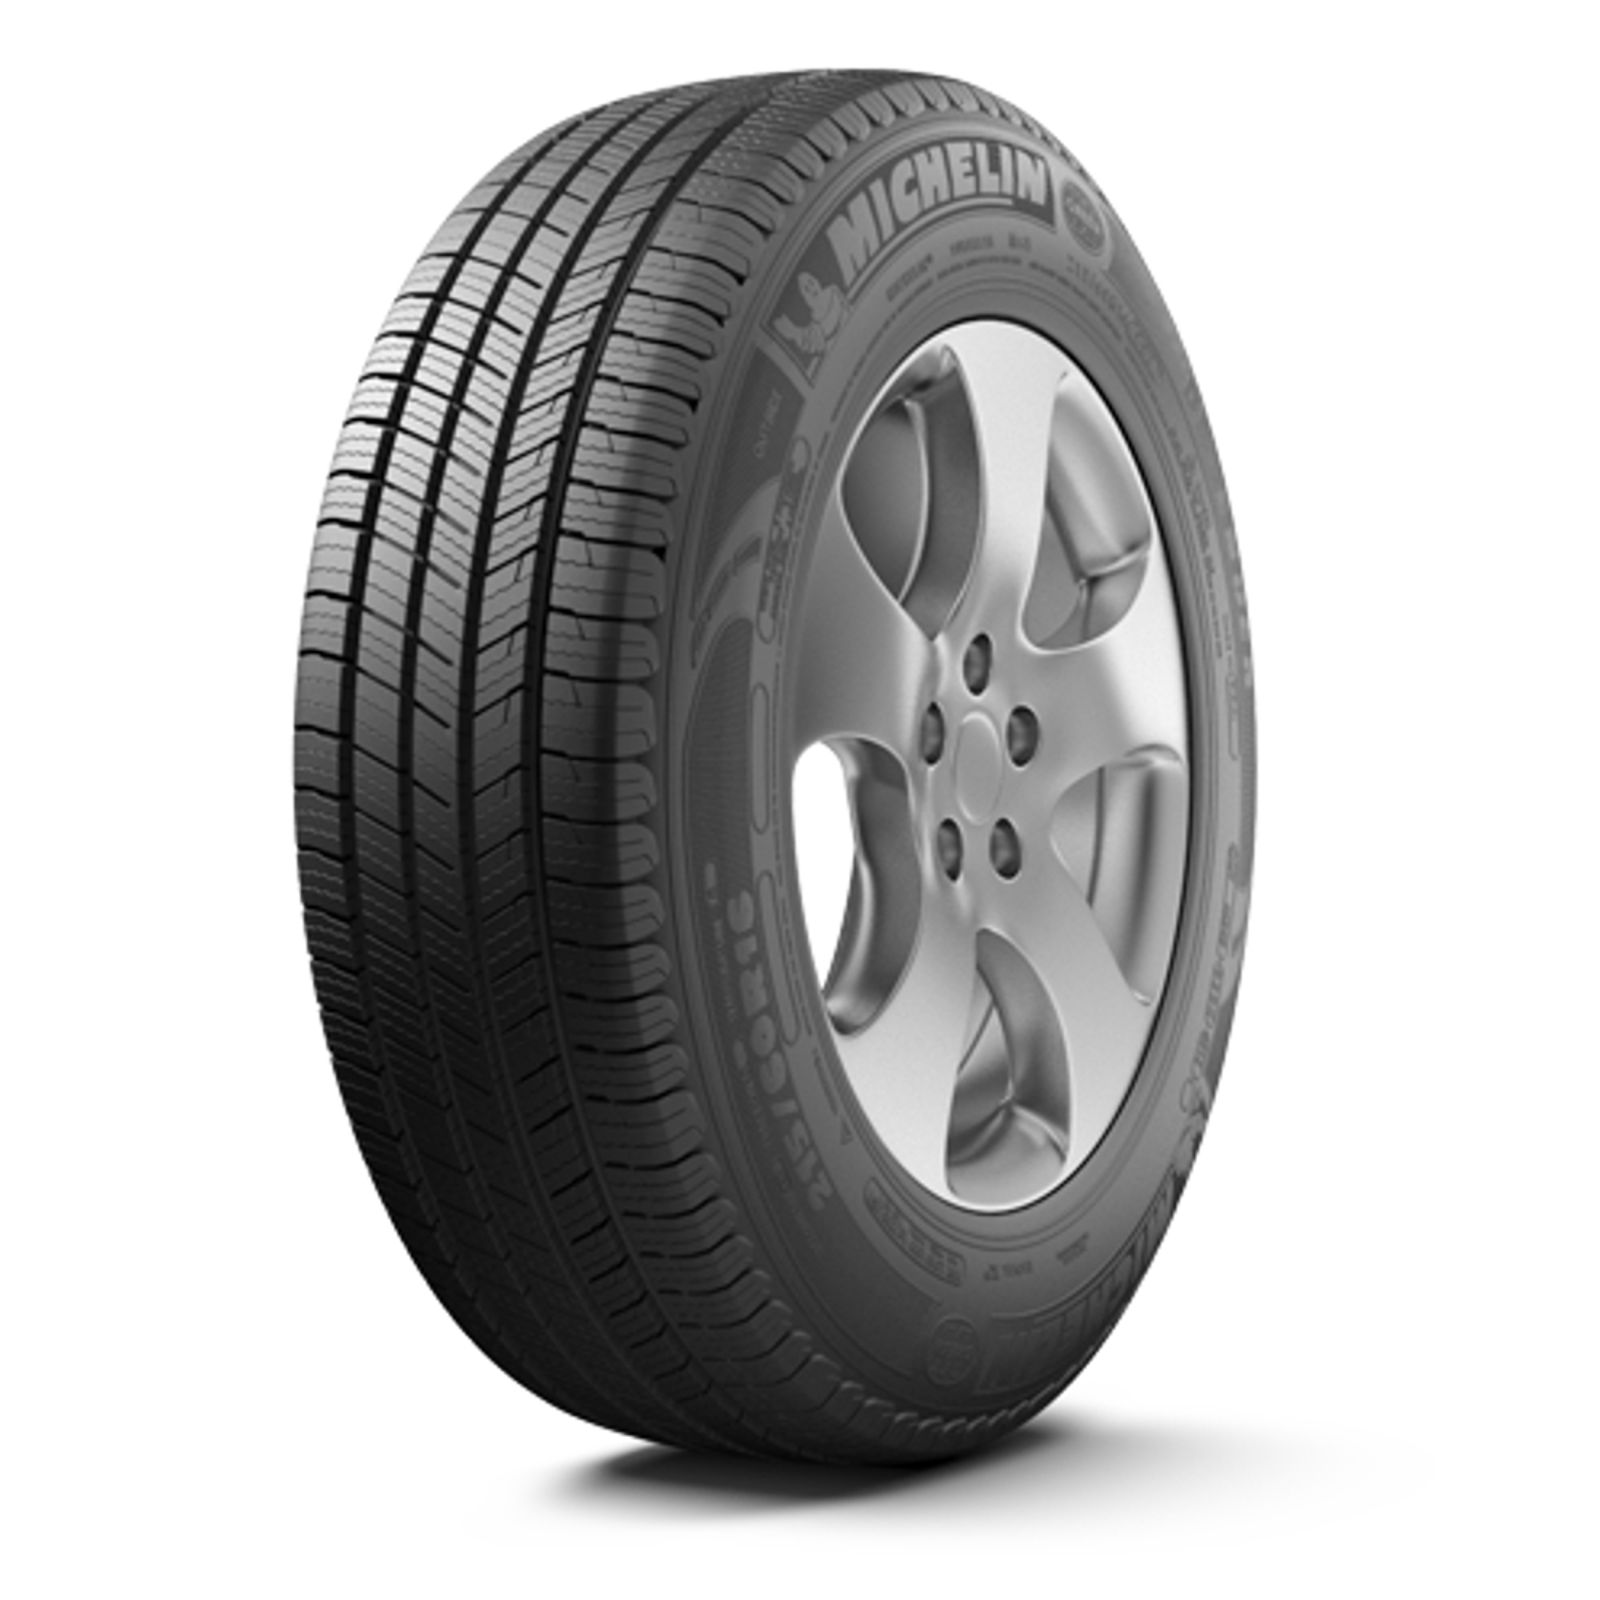 michelin-defender-t-h-tire-canadian-tire